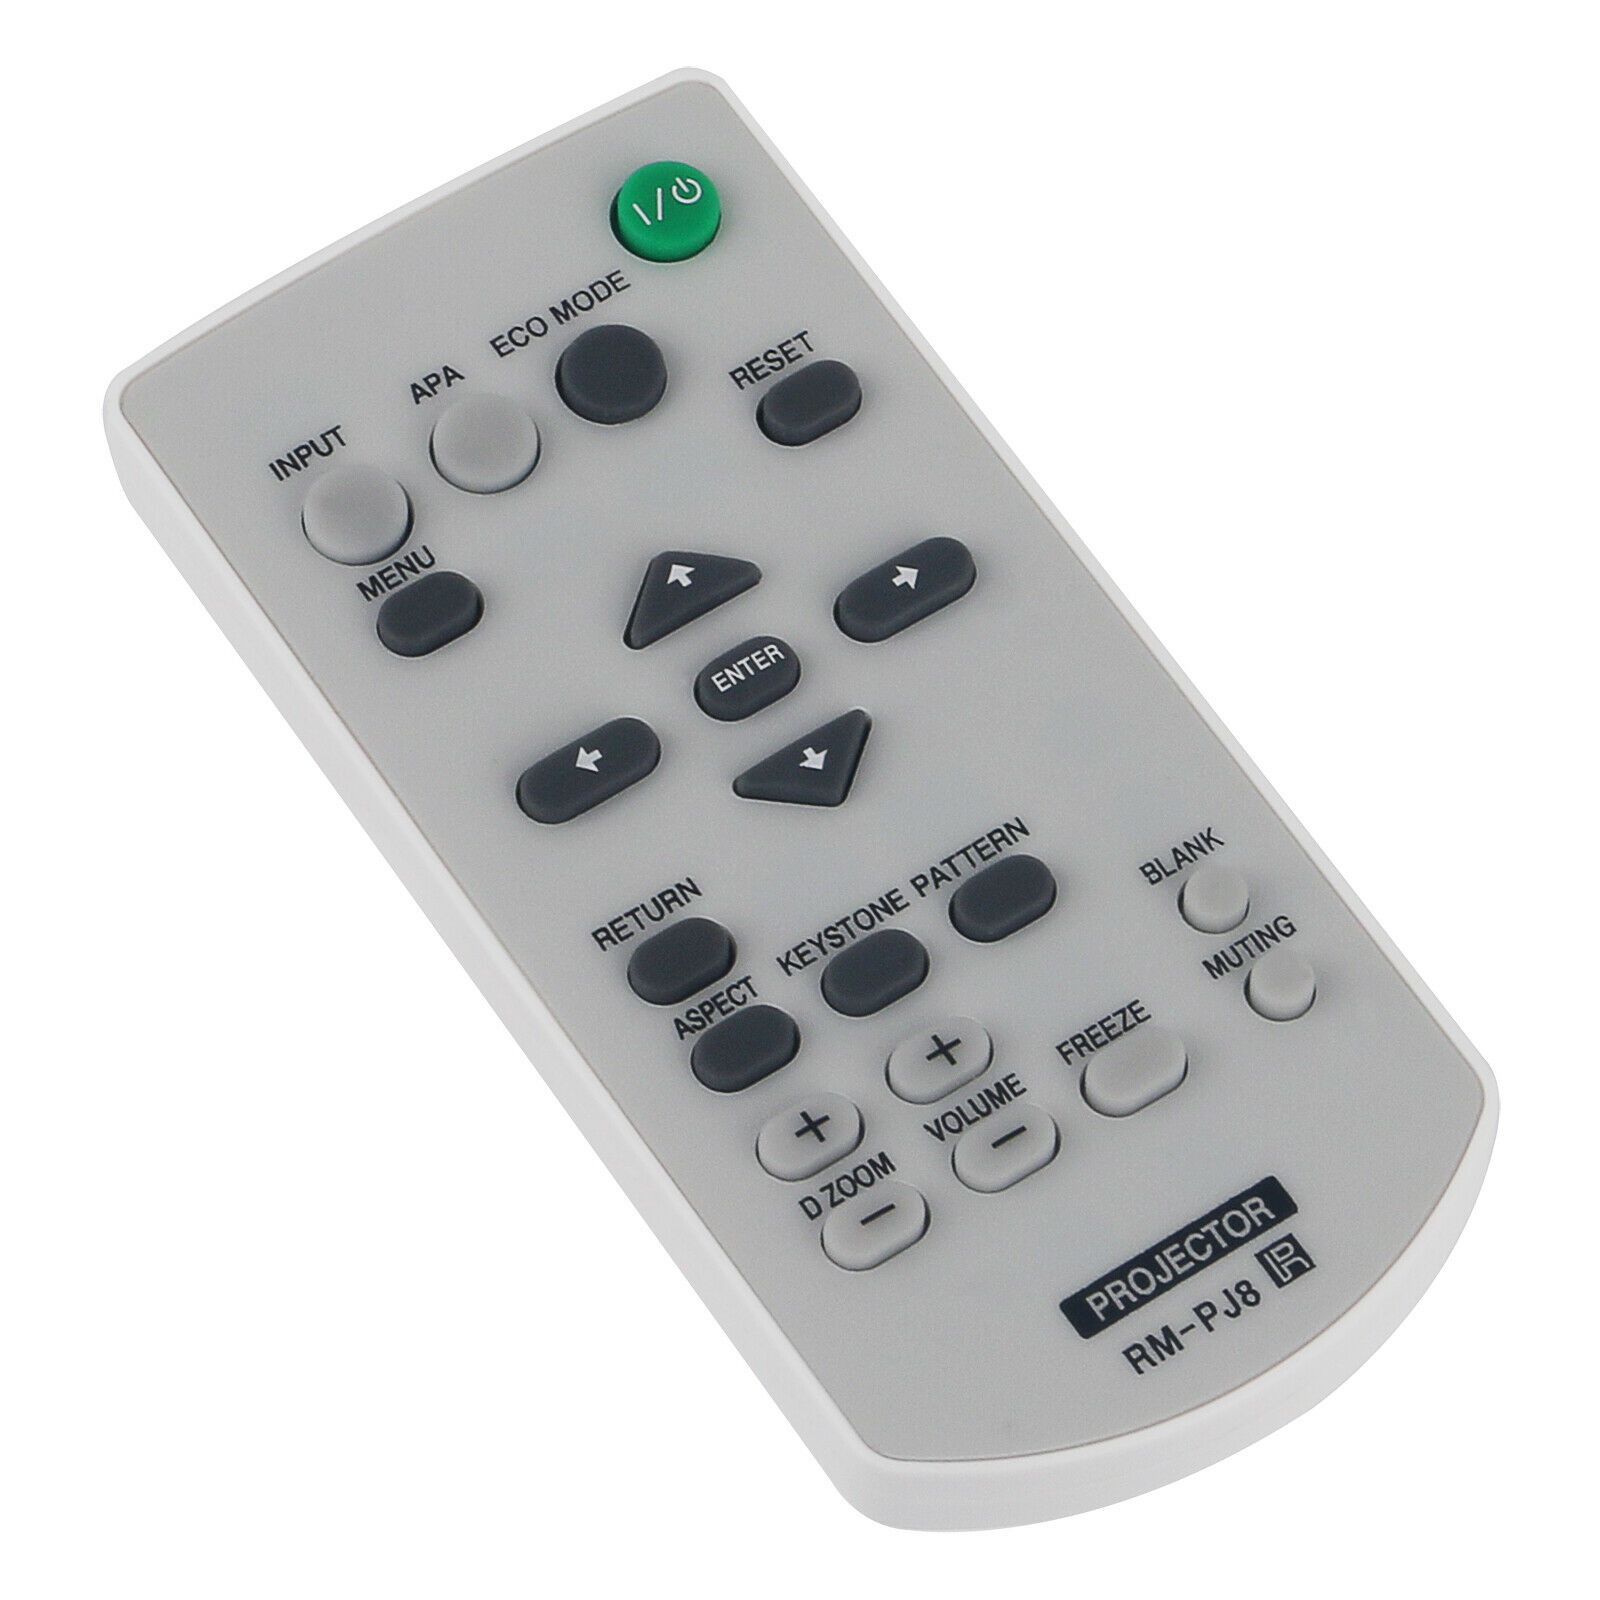 RM-PJ8 Replace Remote for Sony Projector VPL-CH350 VPL-CH375 VPL-CH370 VPL-CH355 - image 4 of 5